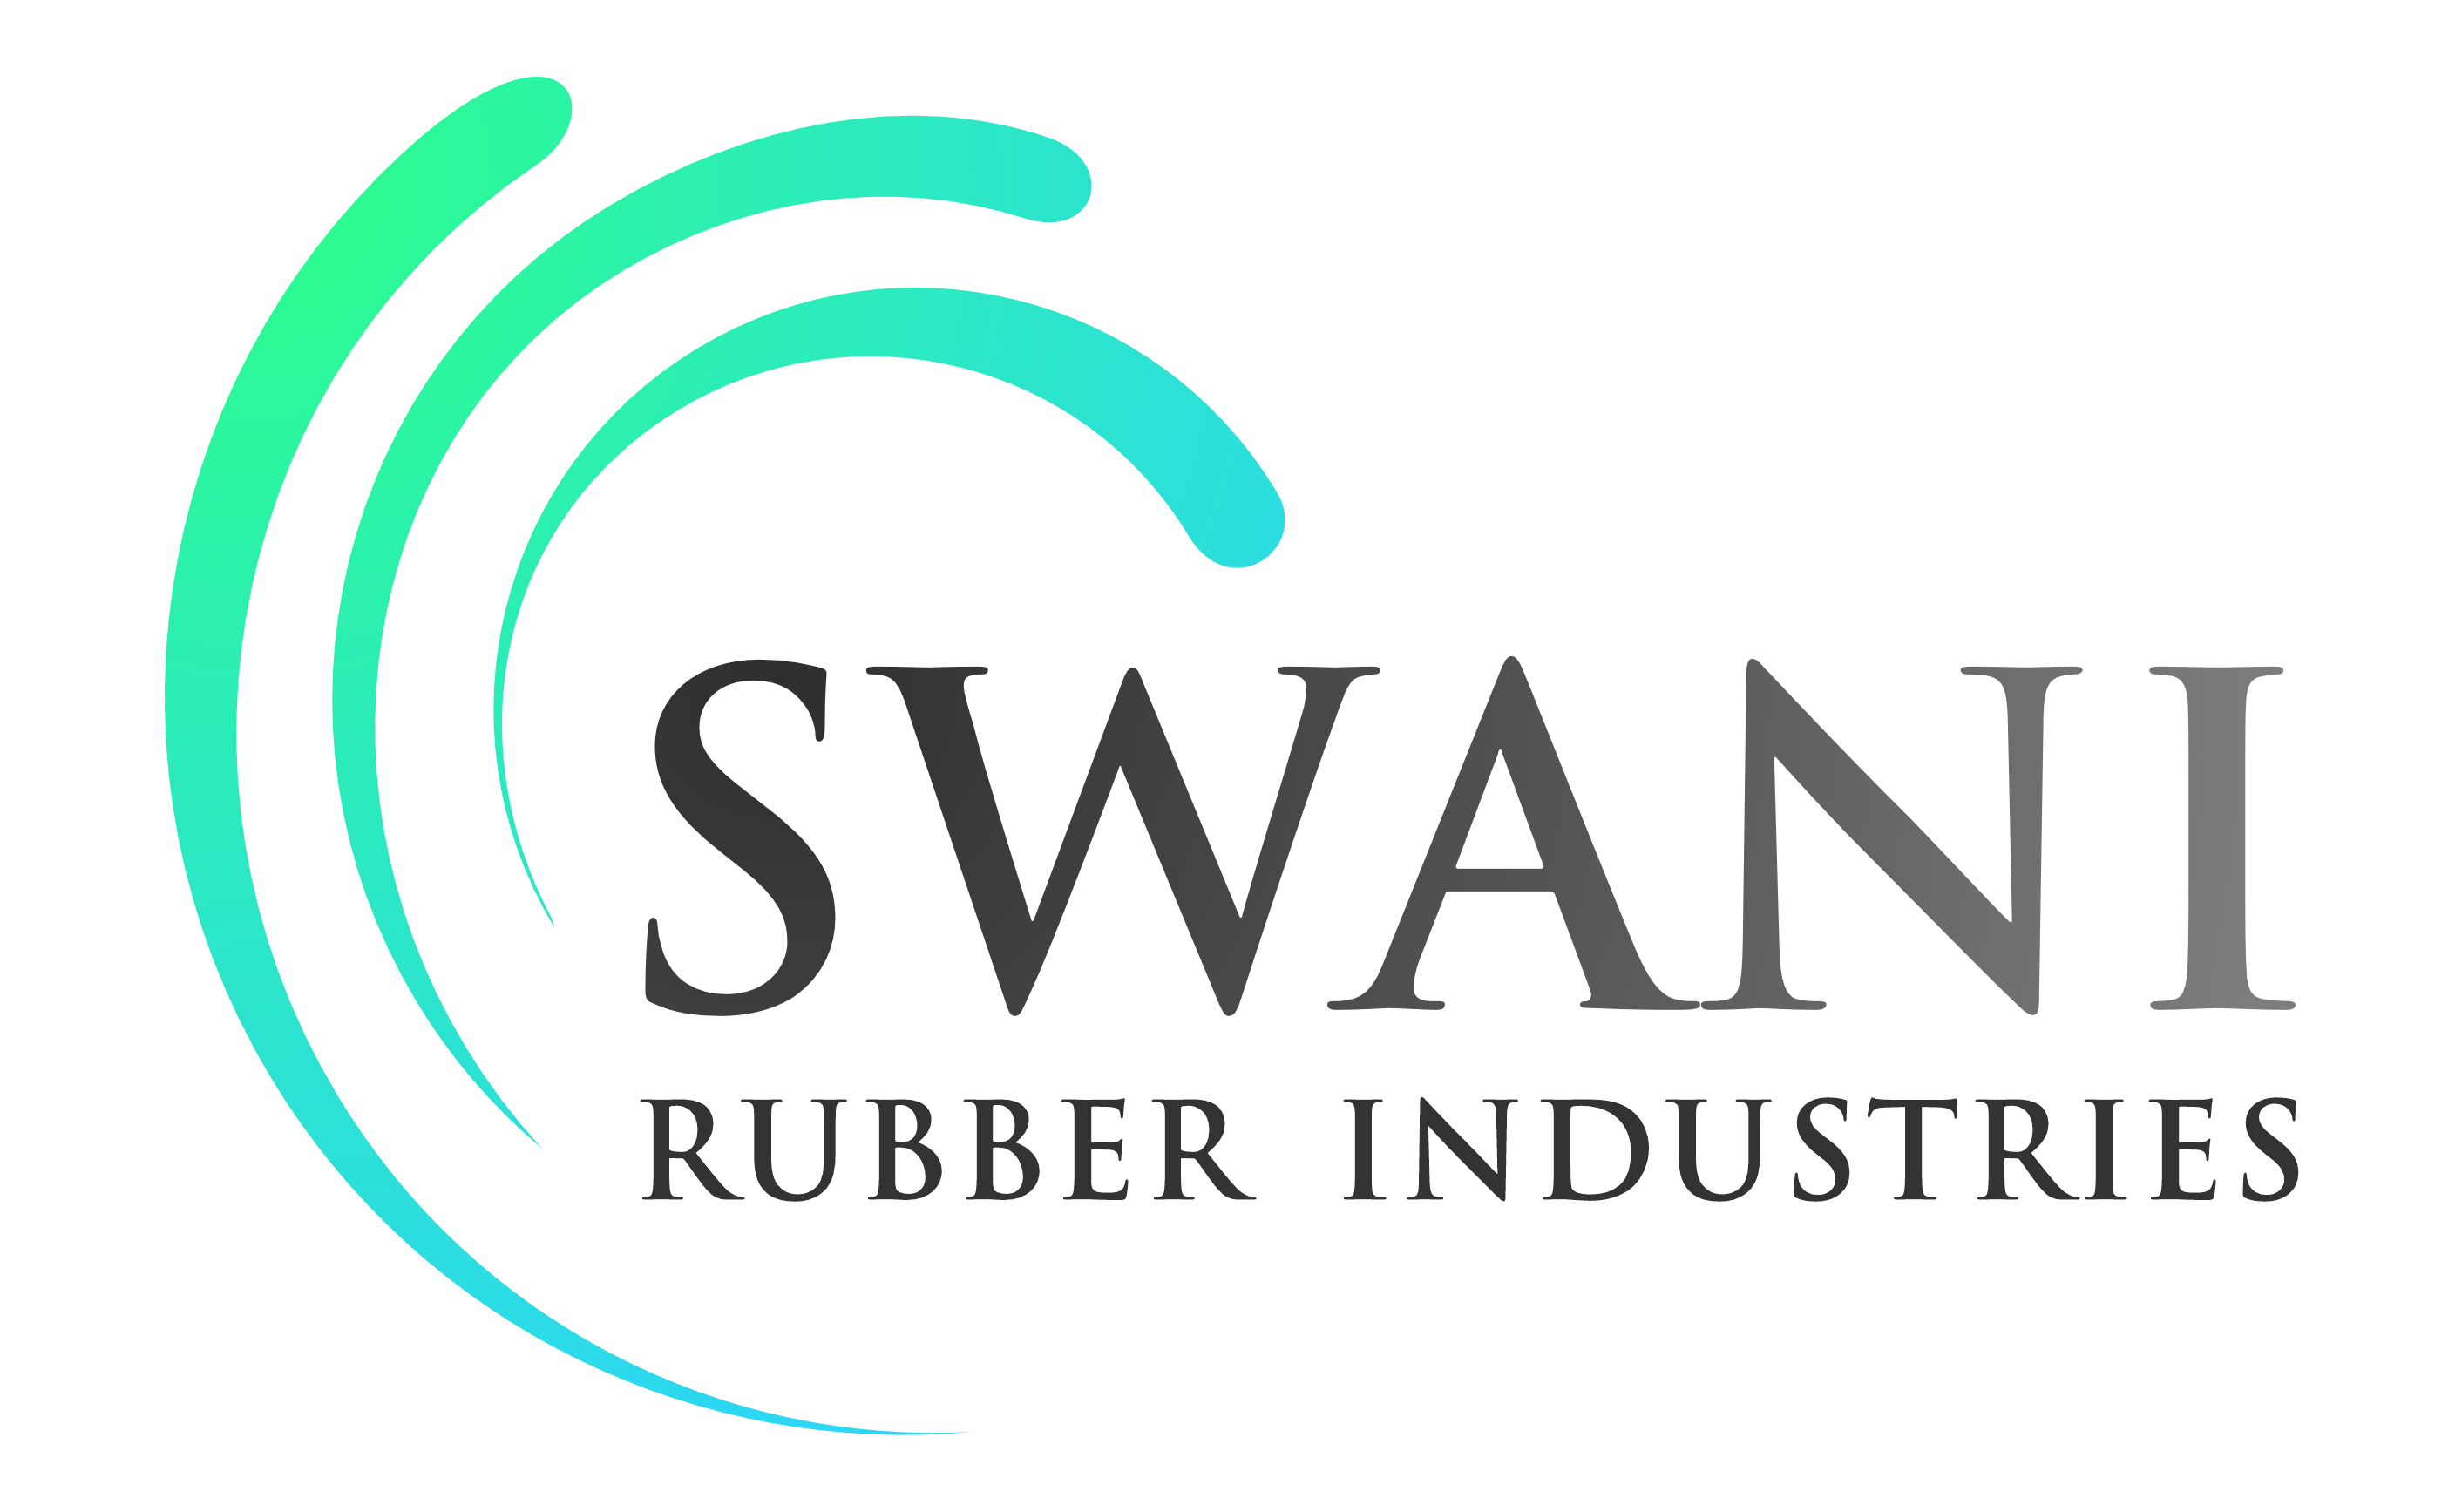 Swani Rubber Industries